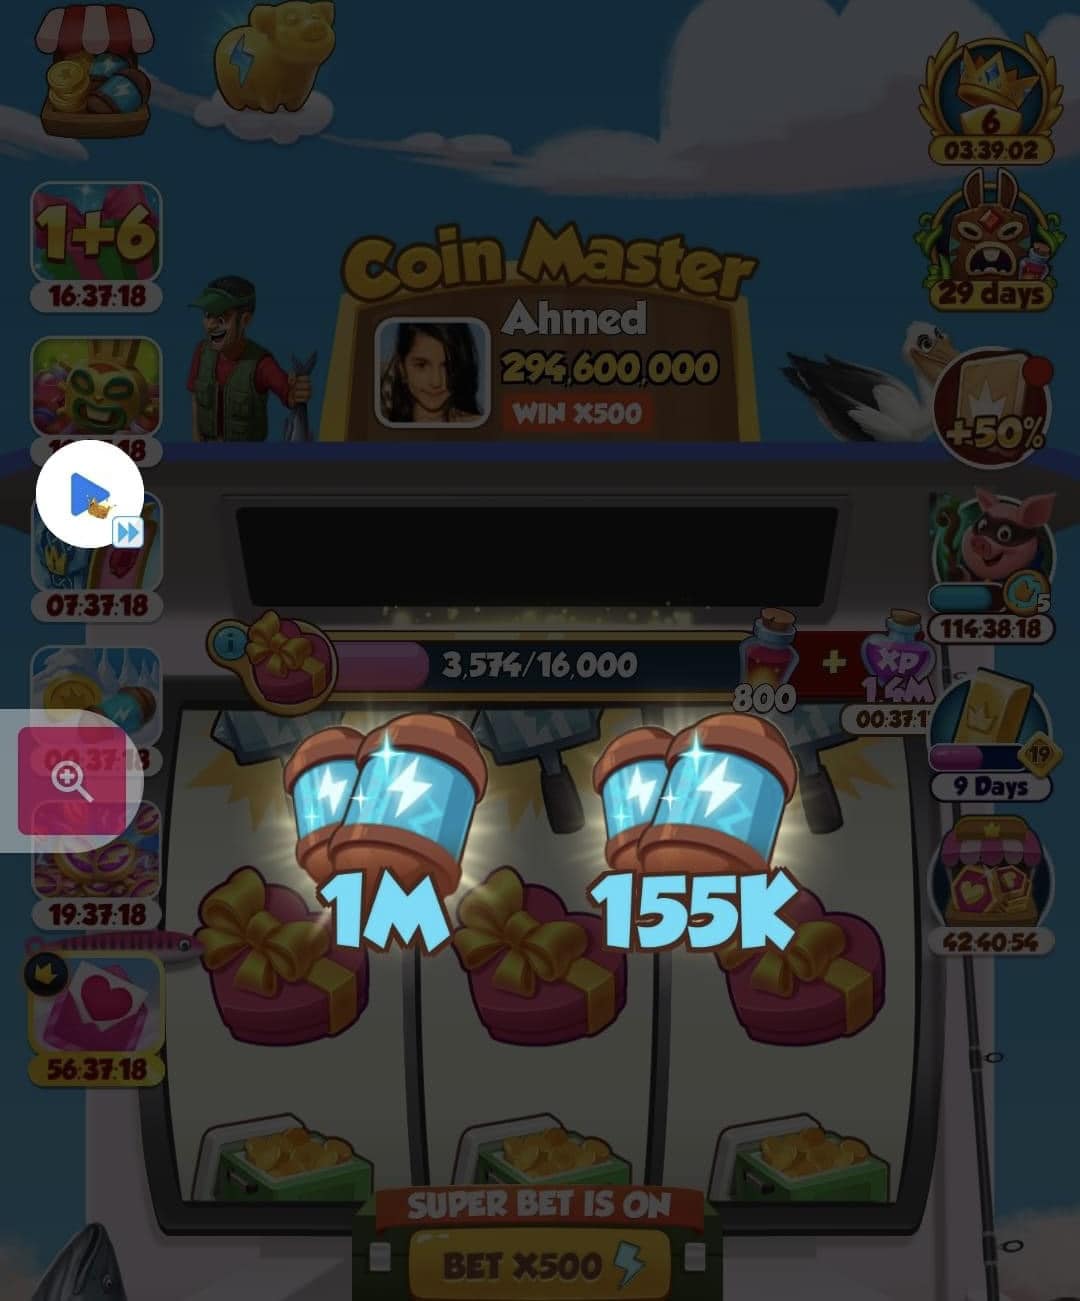 Coin Master 50 Free Spin Gratuit Today March 6